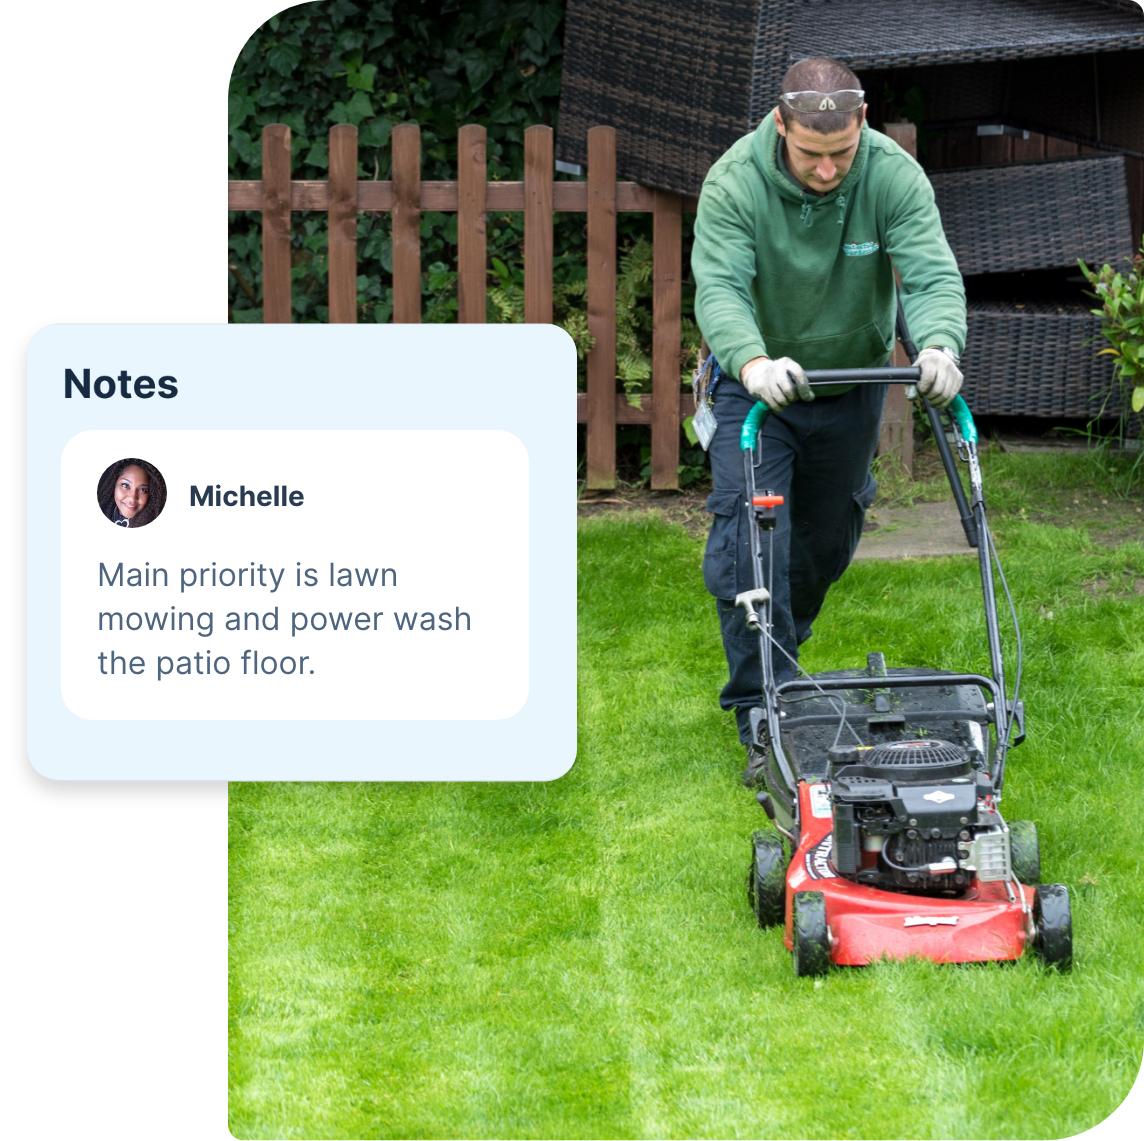 The image shows a professional gardener who is mowing a lawn with a red lawn mower.